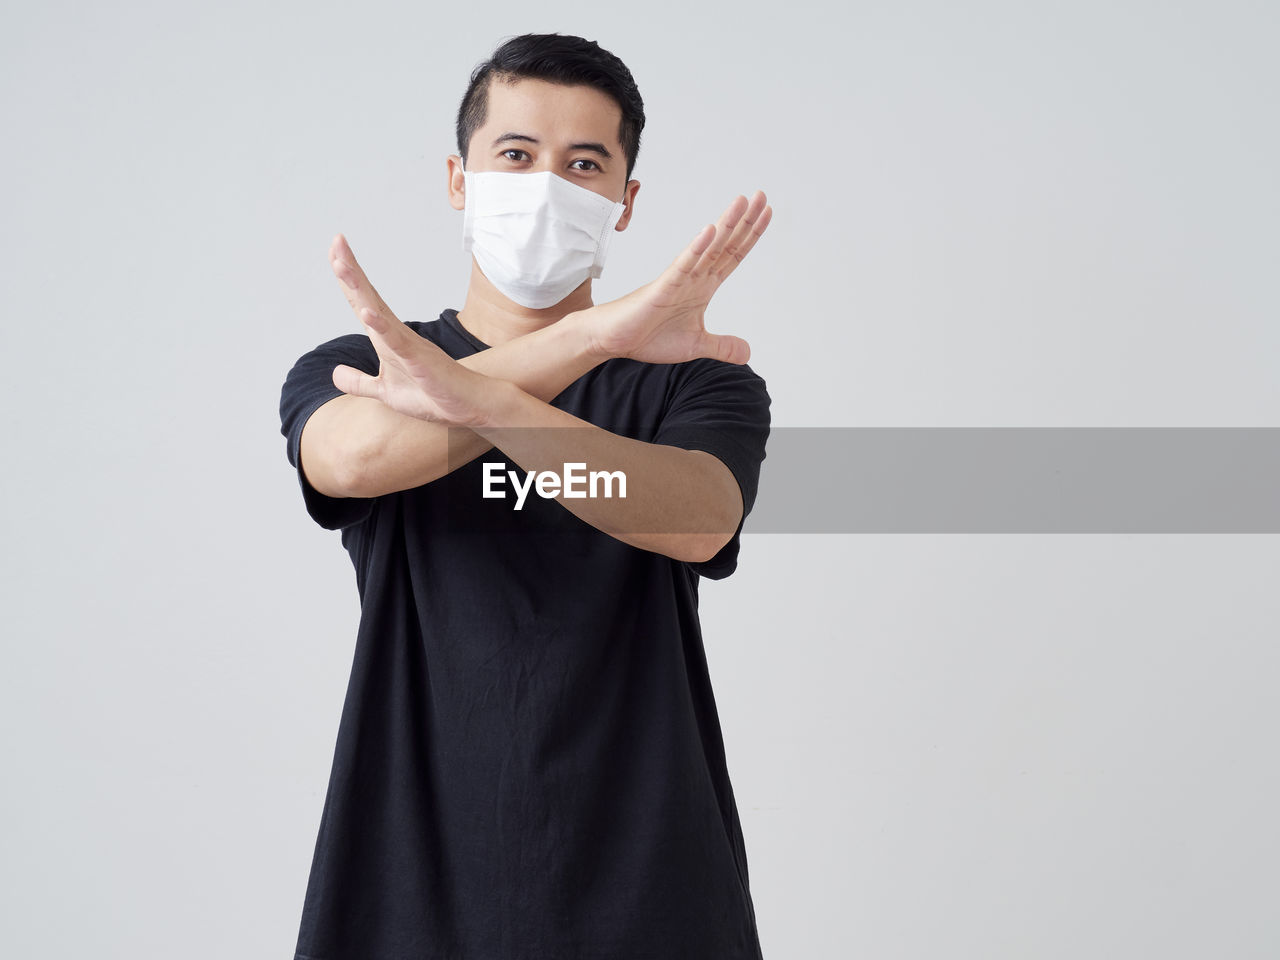 Portrait of man wearing mask gesturing while standing against white background